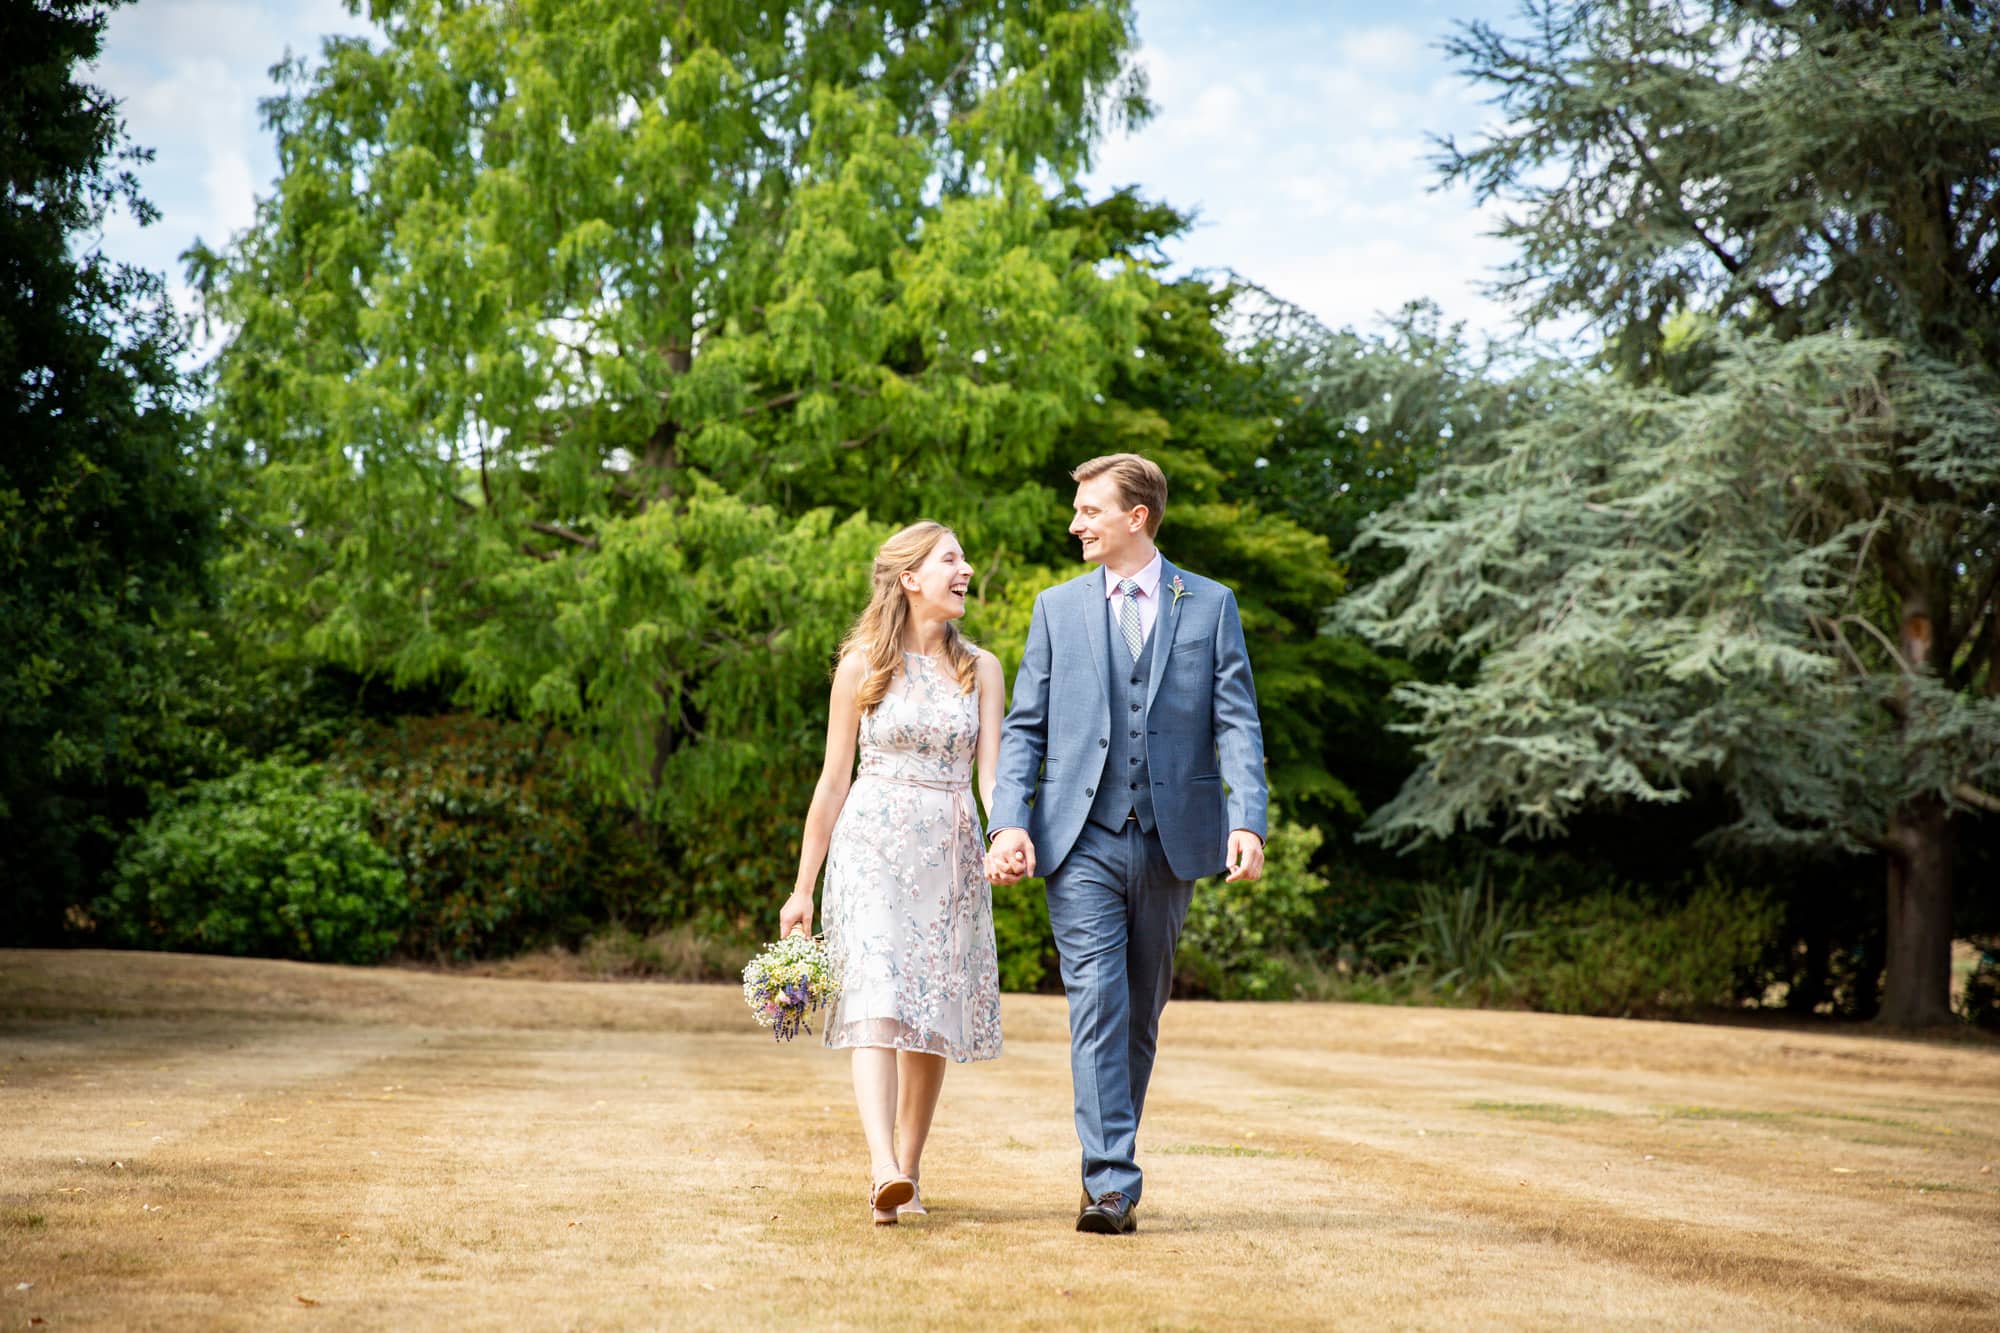 Wedding photograph in the Bromley area of couple walking hand in hand at Oaks Farm Weddings venue